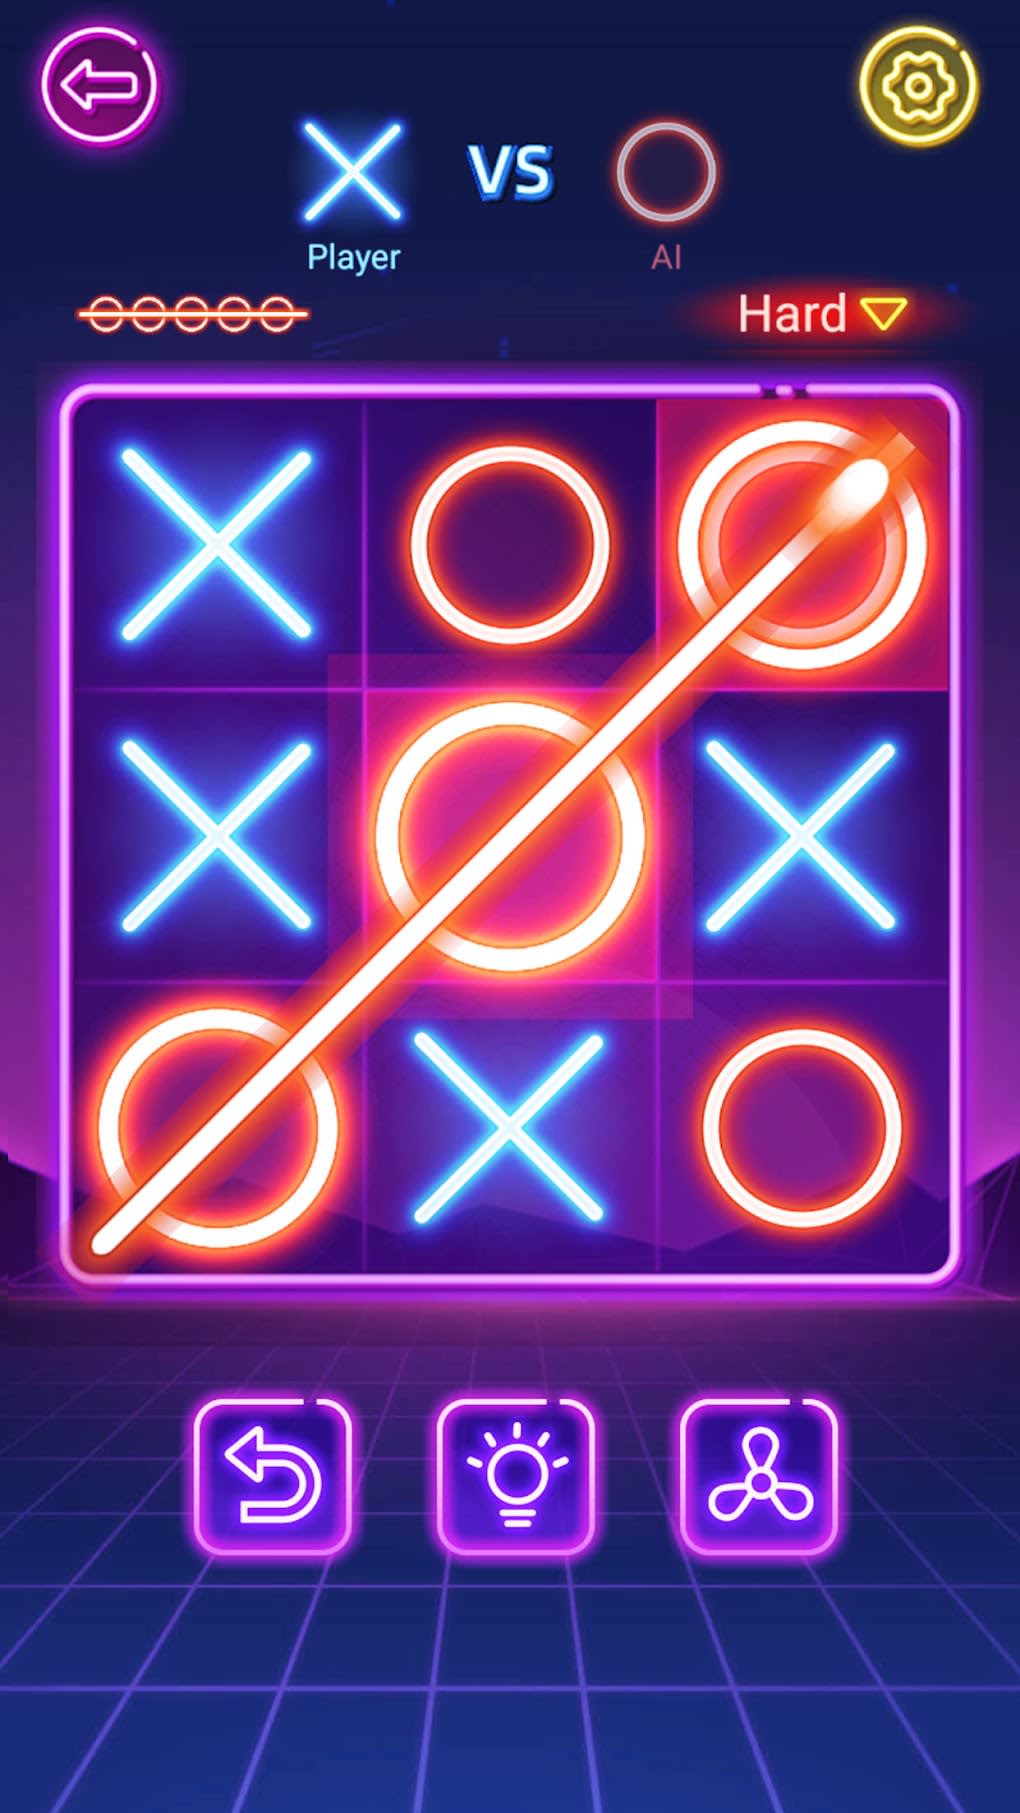 Tic Tac Toe glow - Puzzle Game - Apps on Google Play